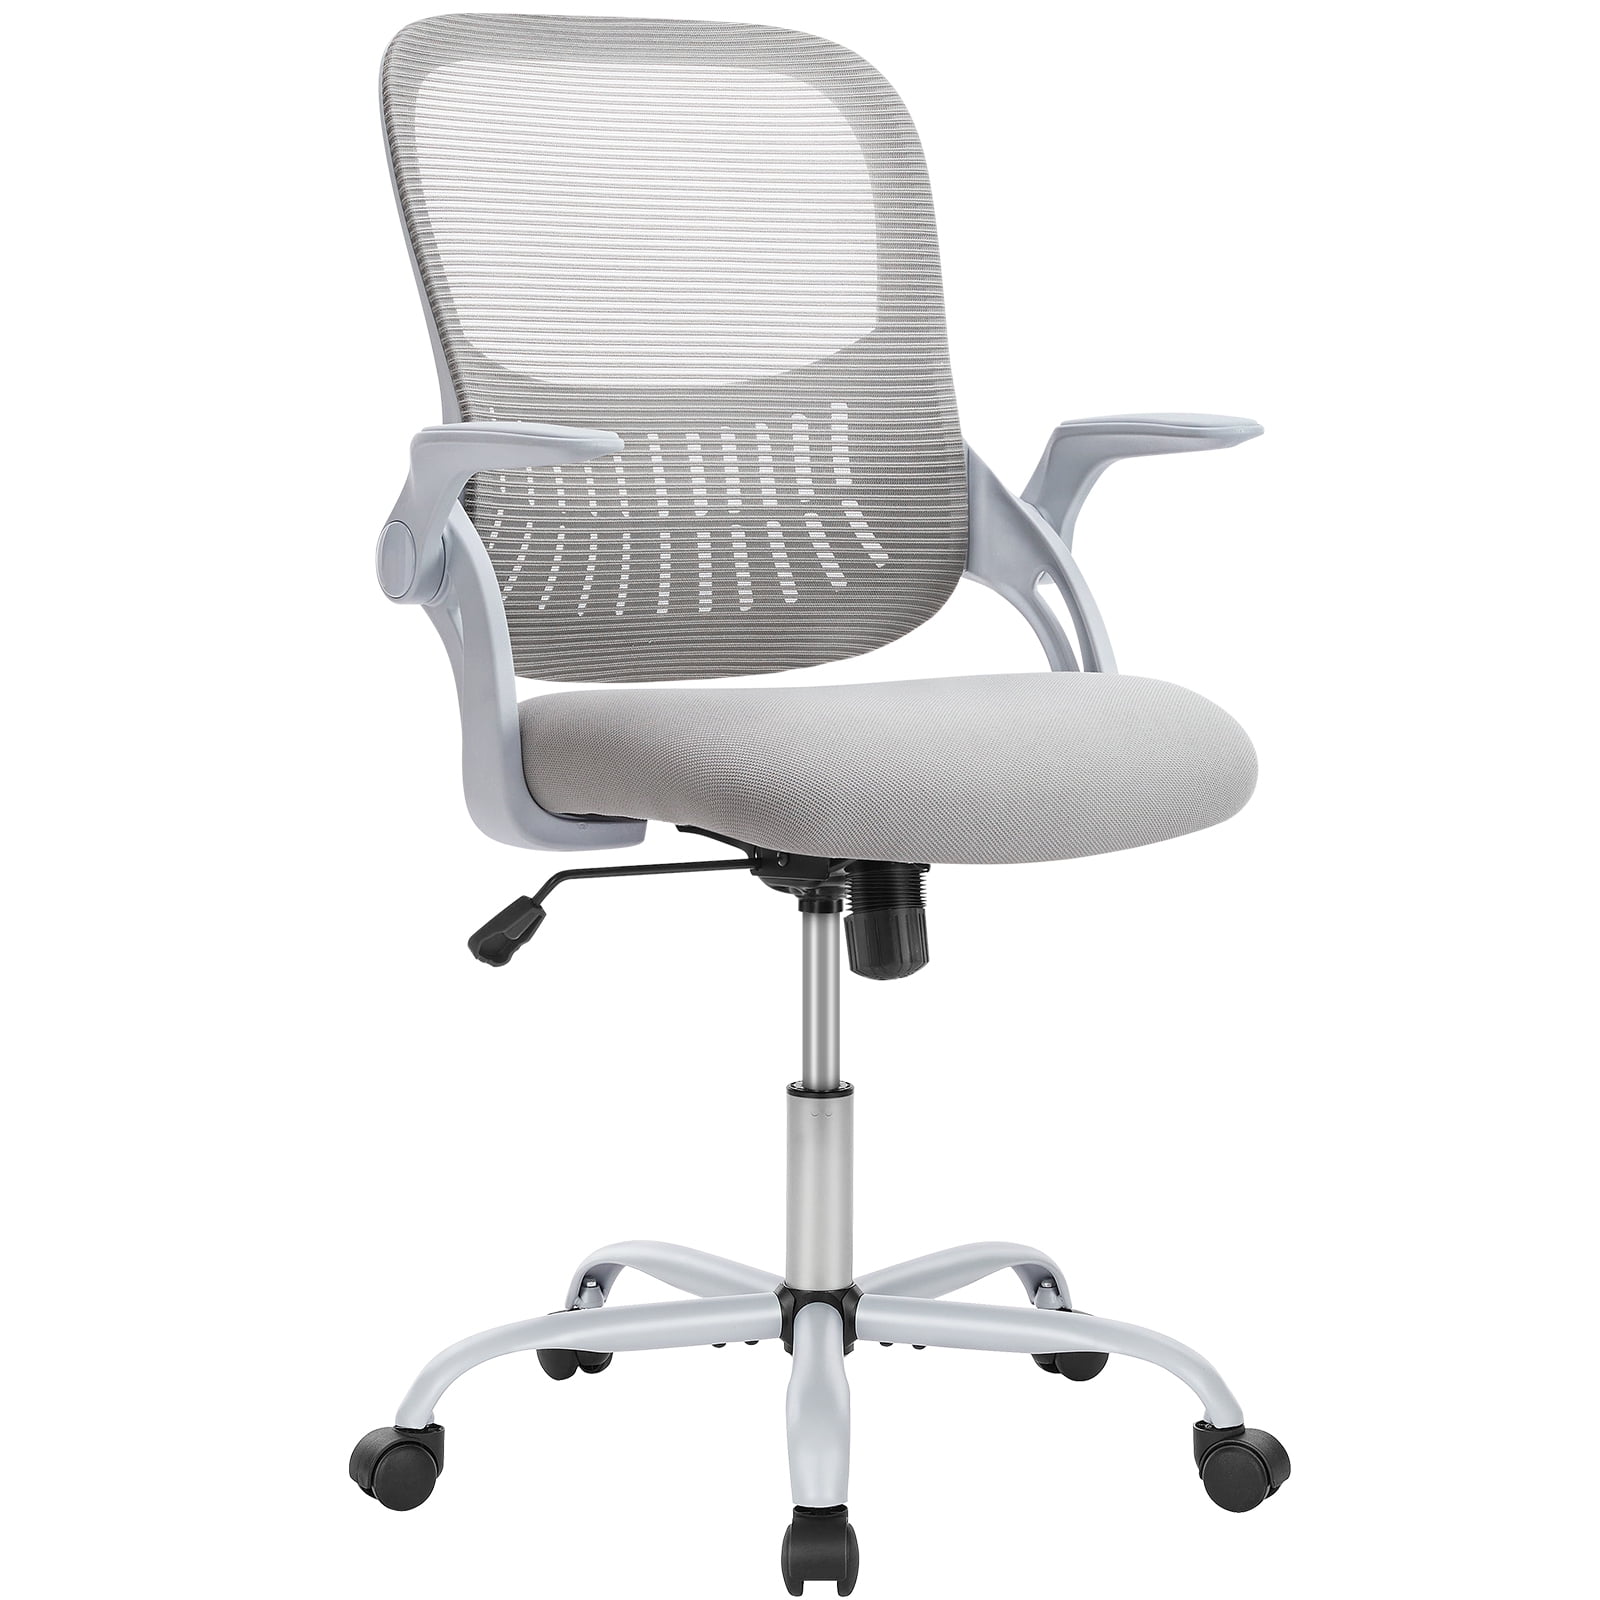 ZUNMOS Drafting Chair, Ergonomic Tall Office Chair with Storable